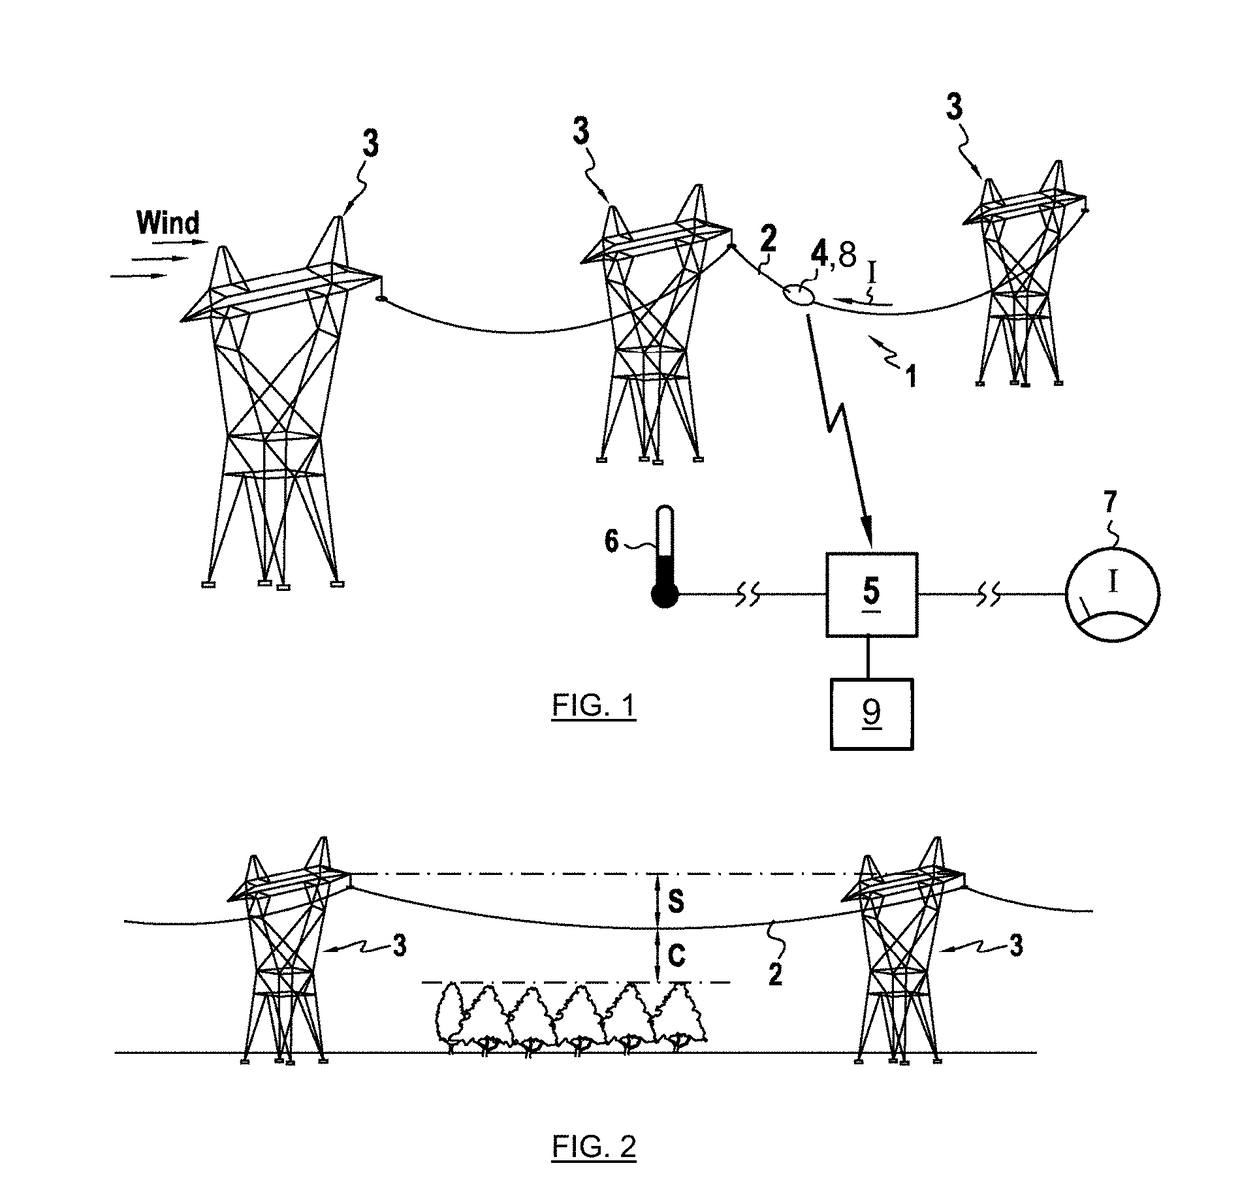 Method and System for Measuring/Detecting Ice or Snow Atmospheric Accretion on Overhead Power Lines